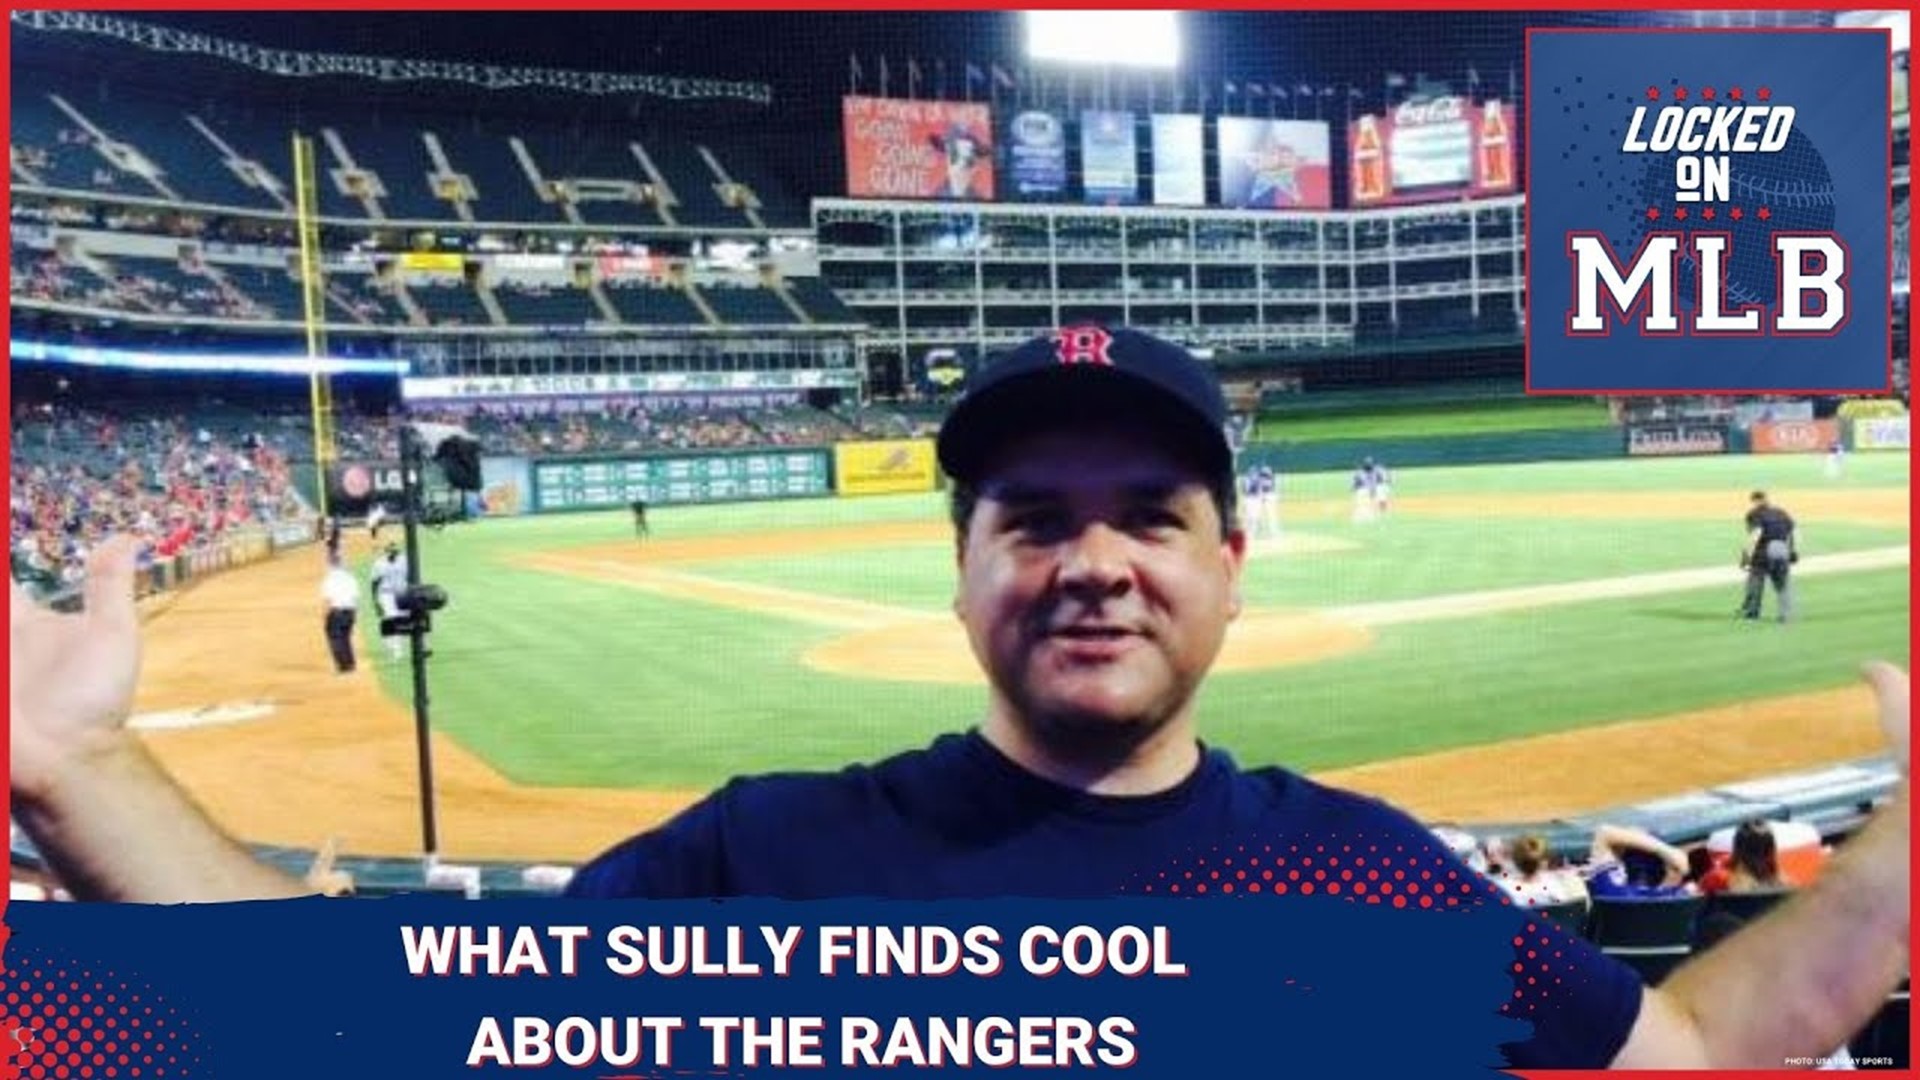 Locked on MLB - The Cool Parts of Texas Rangers History